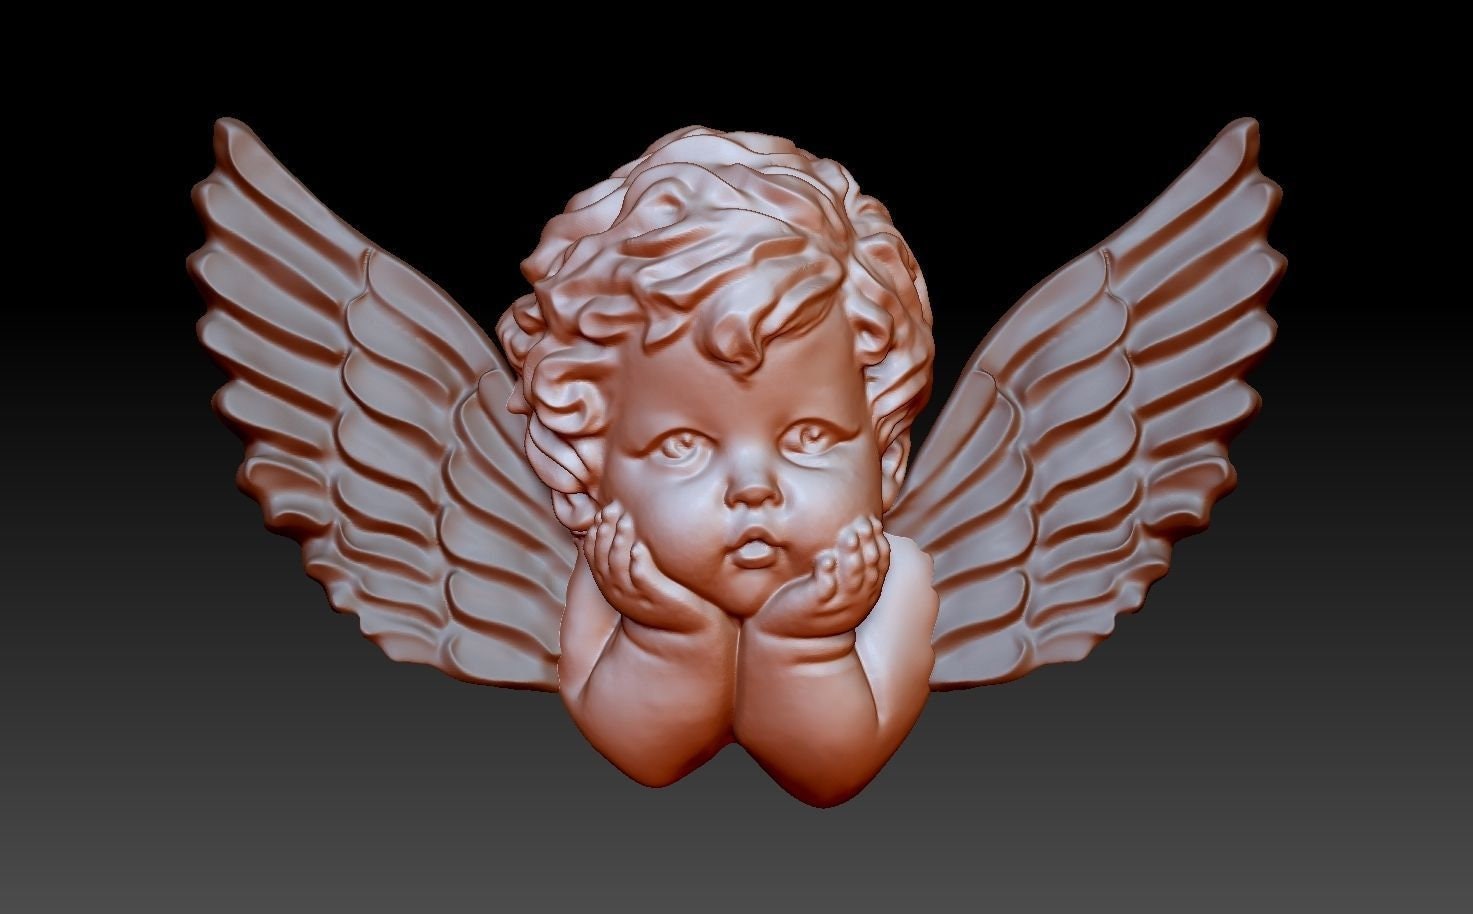 Stampo in silicone angelo per resina Mold stampi formine angeli angel -  RomaLab